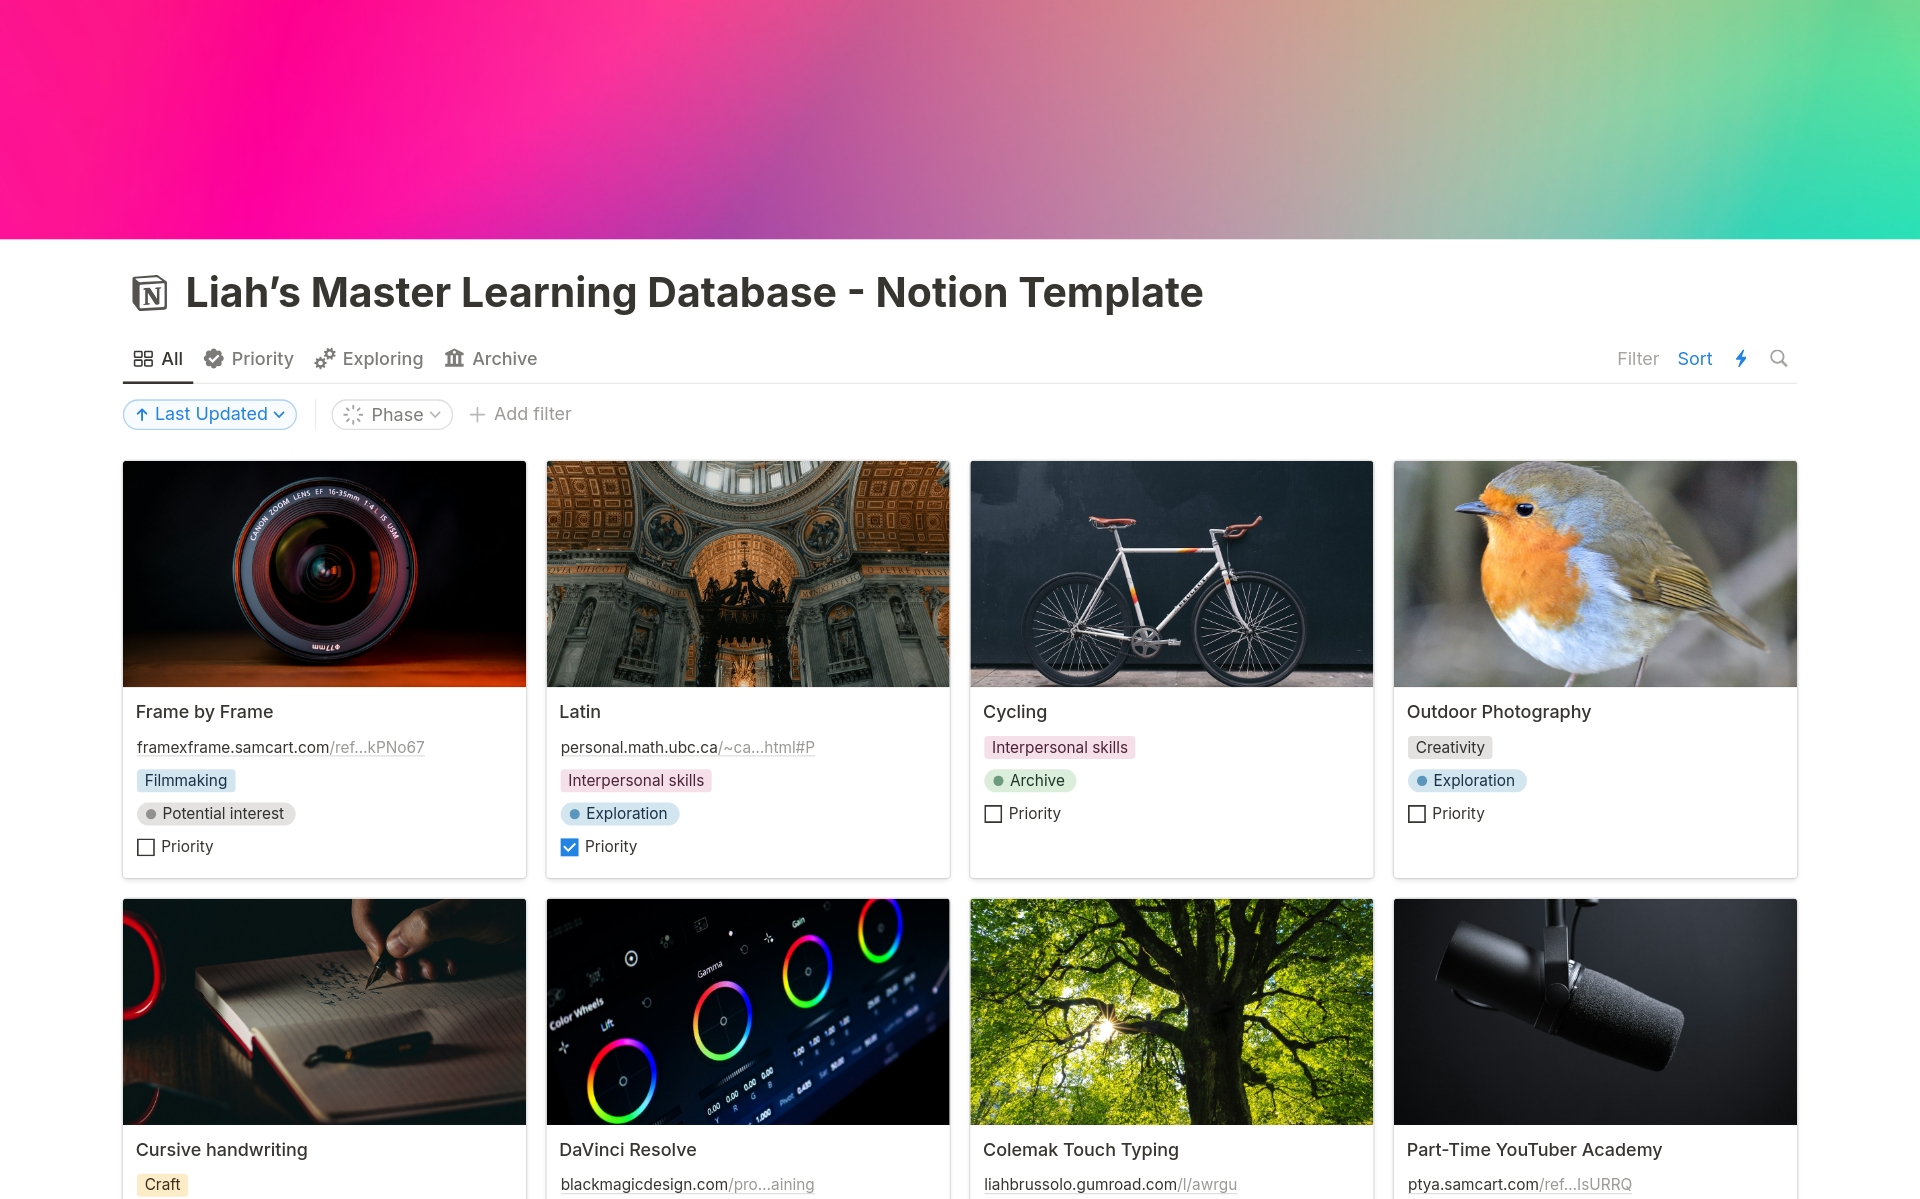 A Notion template for keeping track of all learning pursuits (projects), be it a skill, course, a software application, or personal domain exploration. Ideas to get started are included. A single place to keep all notes and updates on each learning pursuit.